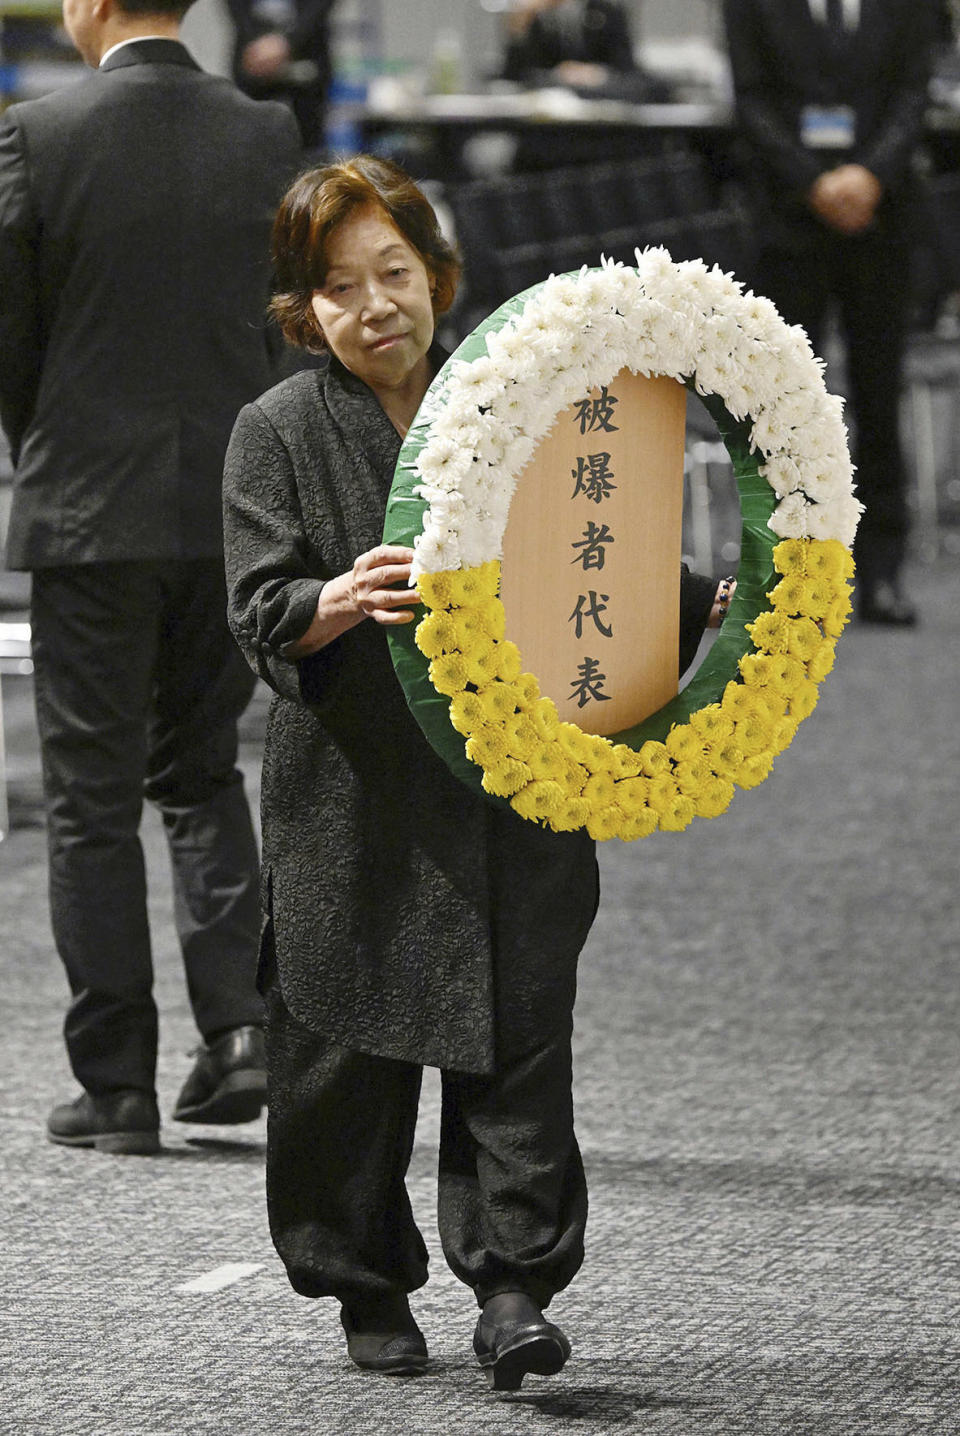 Takeko Kudo, representing atomic bomb victims, walks over to lay a wreath during a ceremony to mark the 78th anniversary of the atomic bombing in Nagasaki, southern Japan, Wednesday, Aug. 9, 2023. Nagasaki marked the 78th anniversary of the the U.S dropping an atomic bomb on the city Wednesday, with its mayor urging nuclear states and those under their nuclear umbrella, including Japan, to not justify nuclear weapons for deterrence and go for abolishing. (Kyodo News via AP)